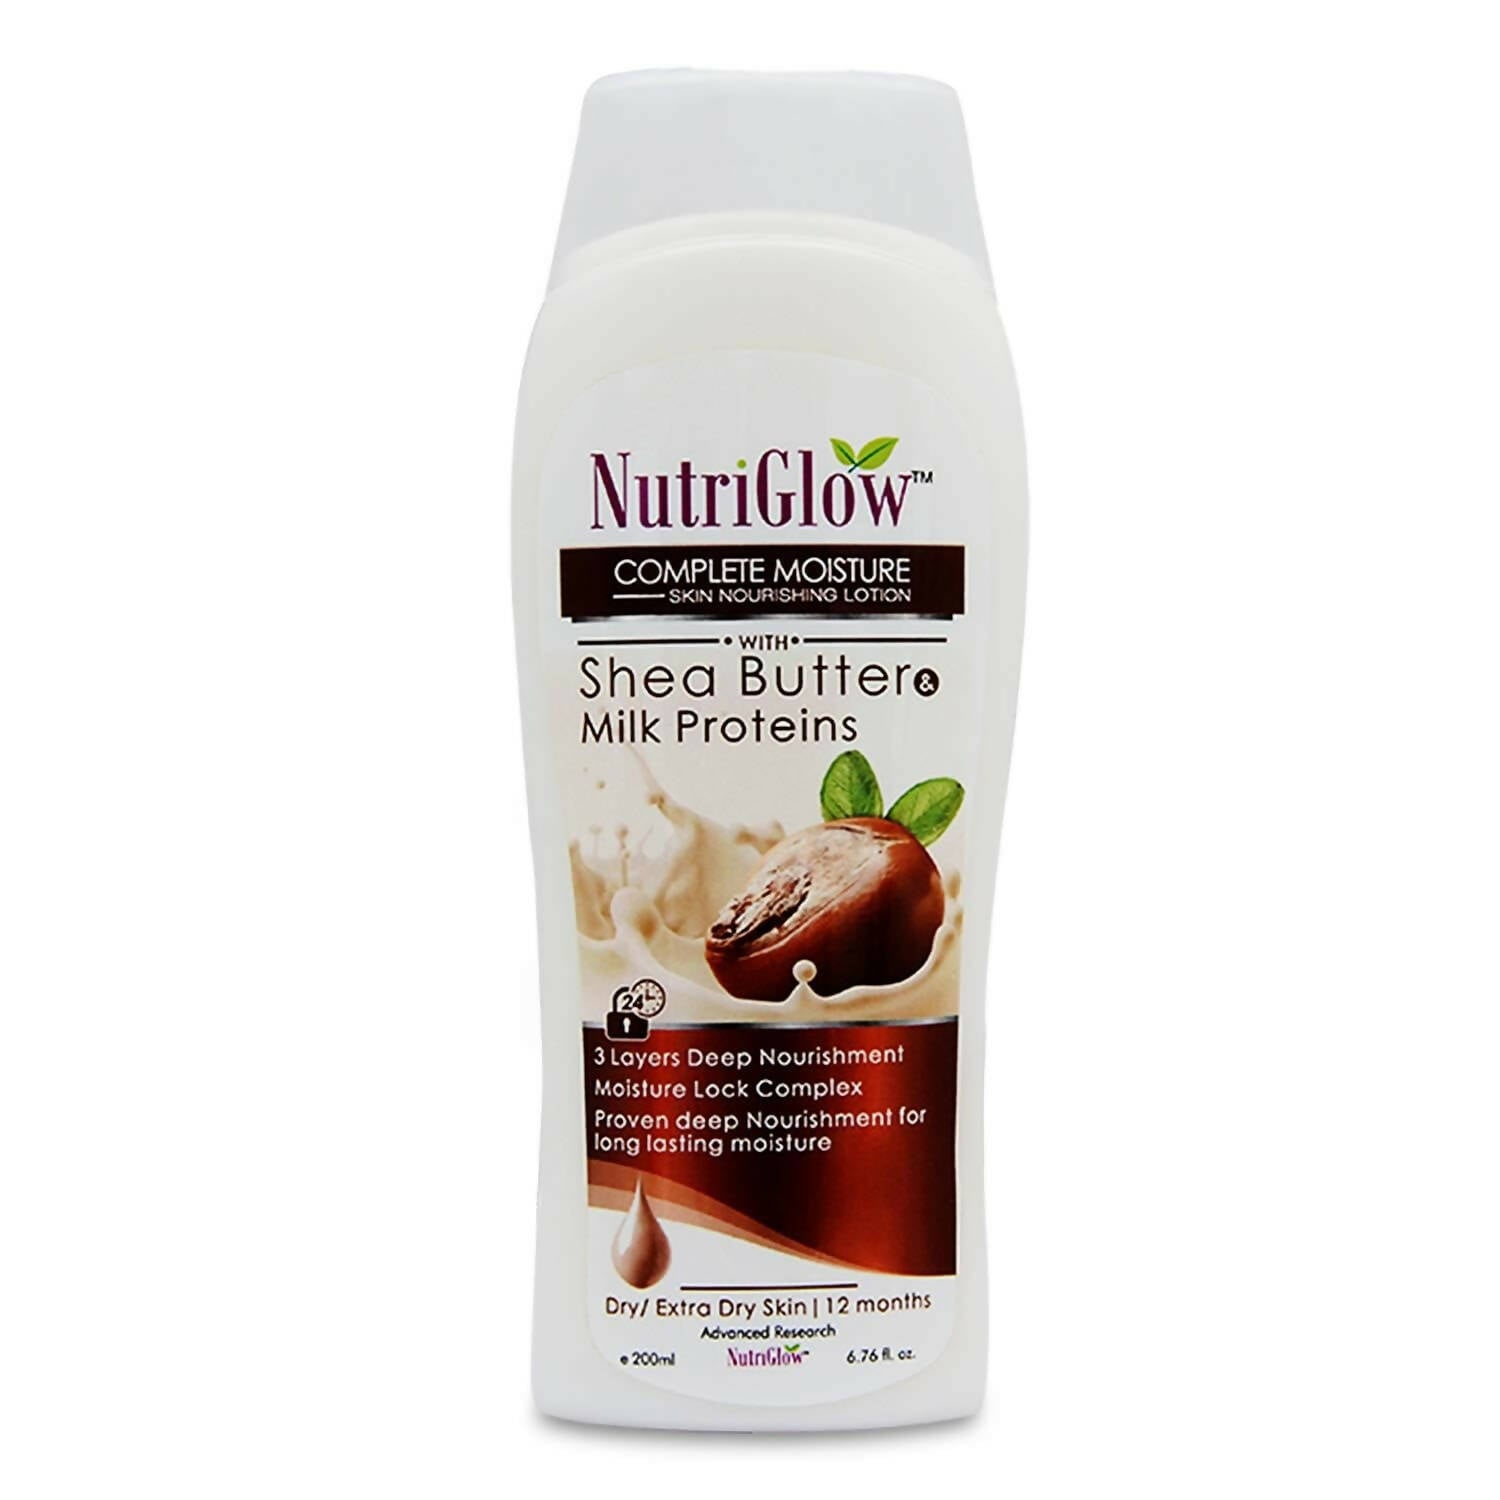 NutriGlow Complete Moisture Skin Nourishing Lotion With Shea Butter & Milk Protein - BUDNEN